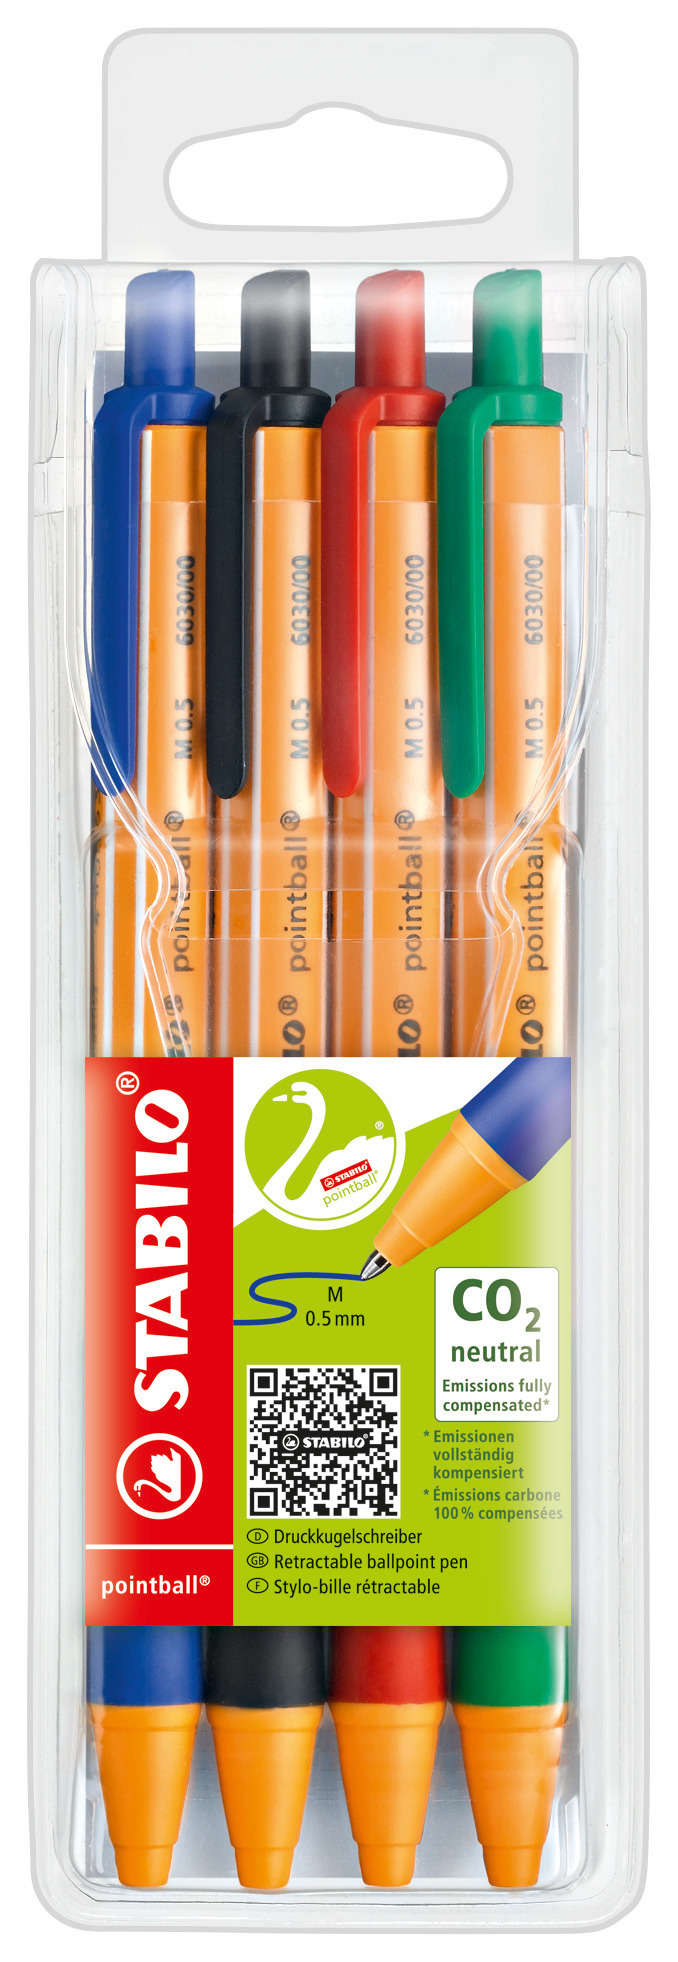 stabilo Stabilo Pointball Co2 Neutral Retractable Ballpoint 0.5mm Line Black/blue/red/green (wallet 4) 6030/4 6030/4 - AD01